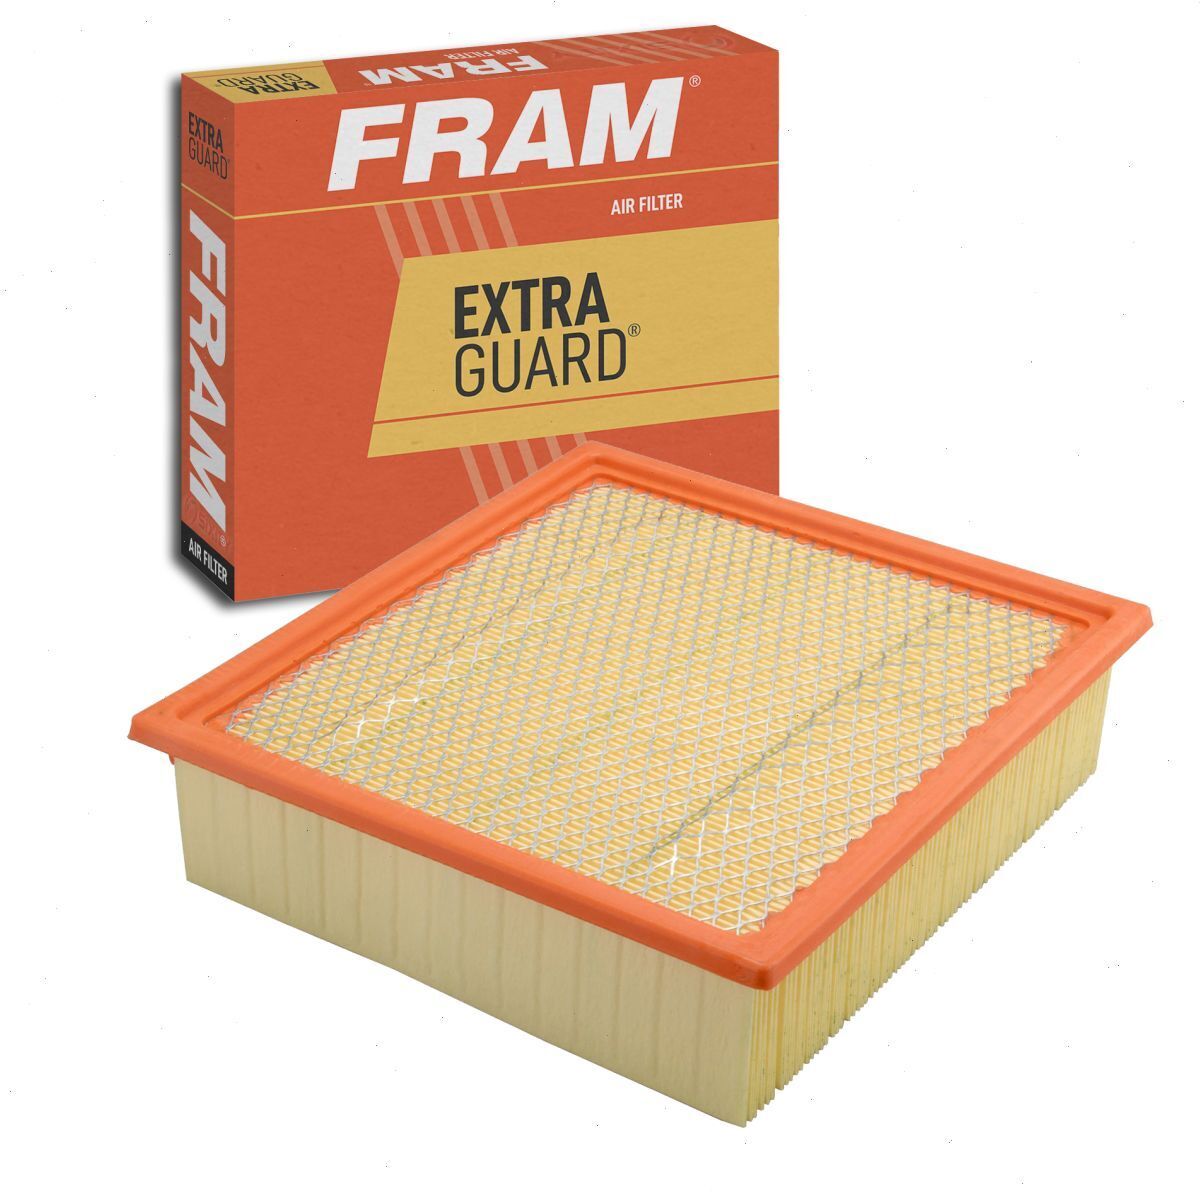 FRAM Extra Guard Air Filter for 2009-2018 Ford F-150 Intake Inlet Manifold vf